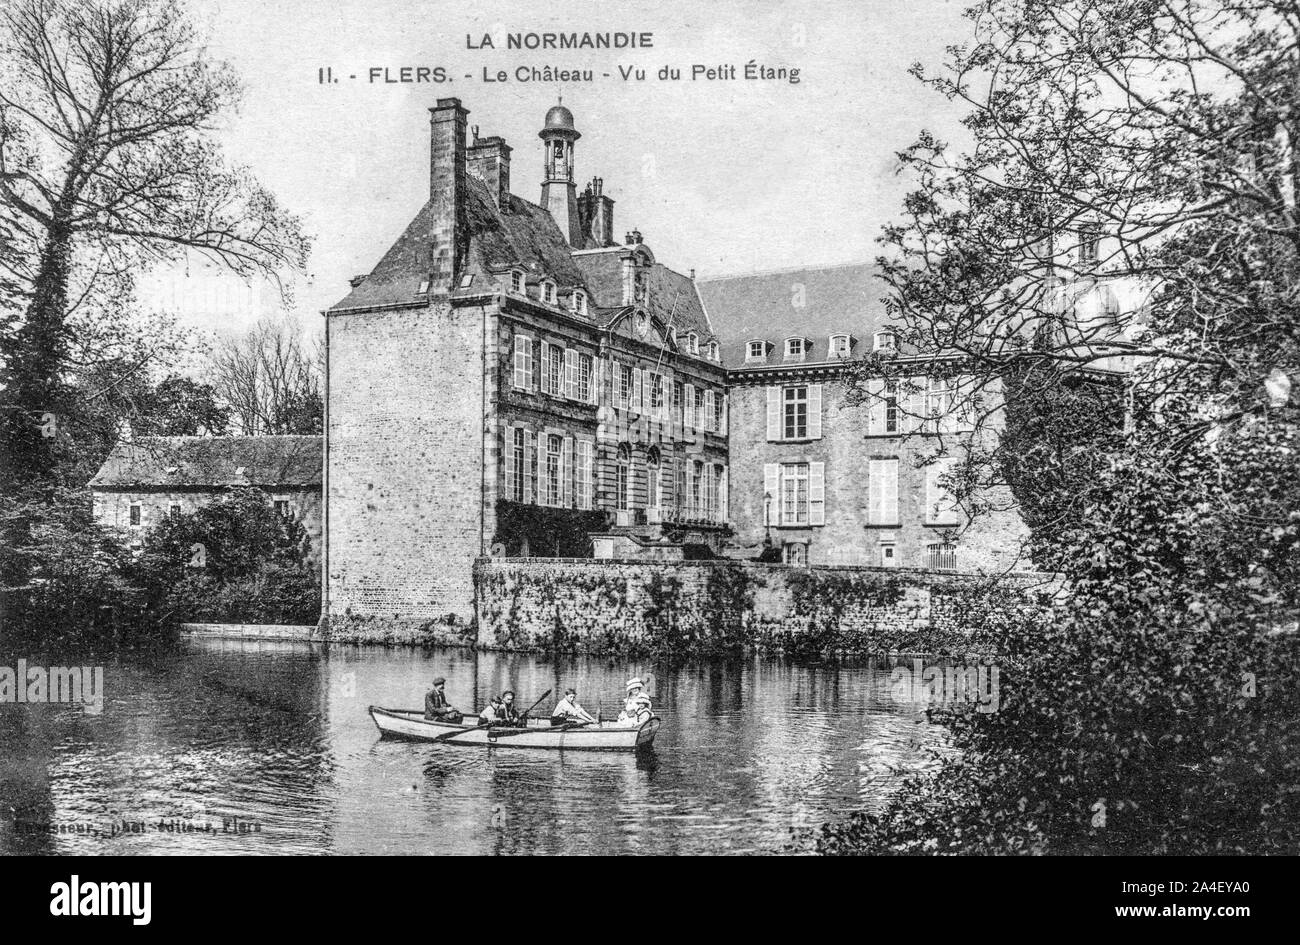 OLD POSTCARD, BOAT ON THE SMALL LAKE OF THE CHATEAU DE FLERS, NORMANDY, FRANCE Stock Photo